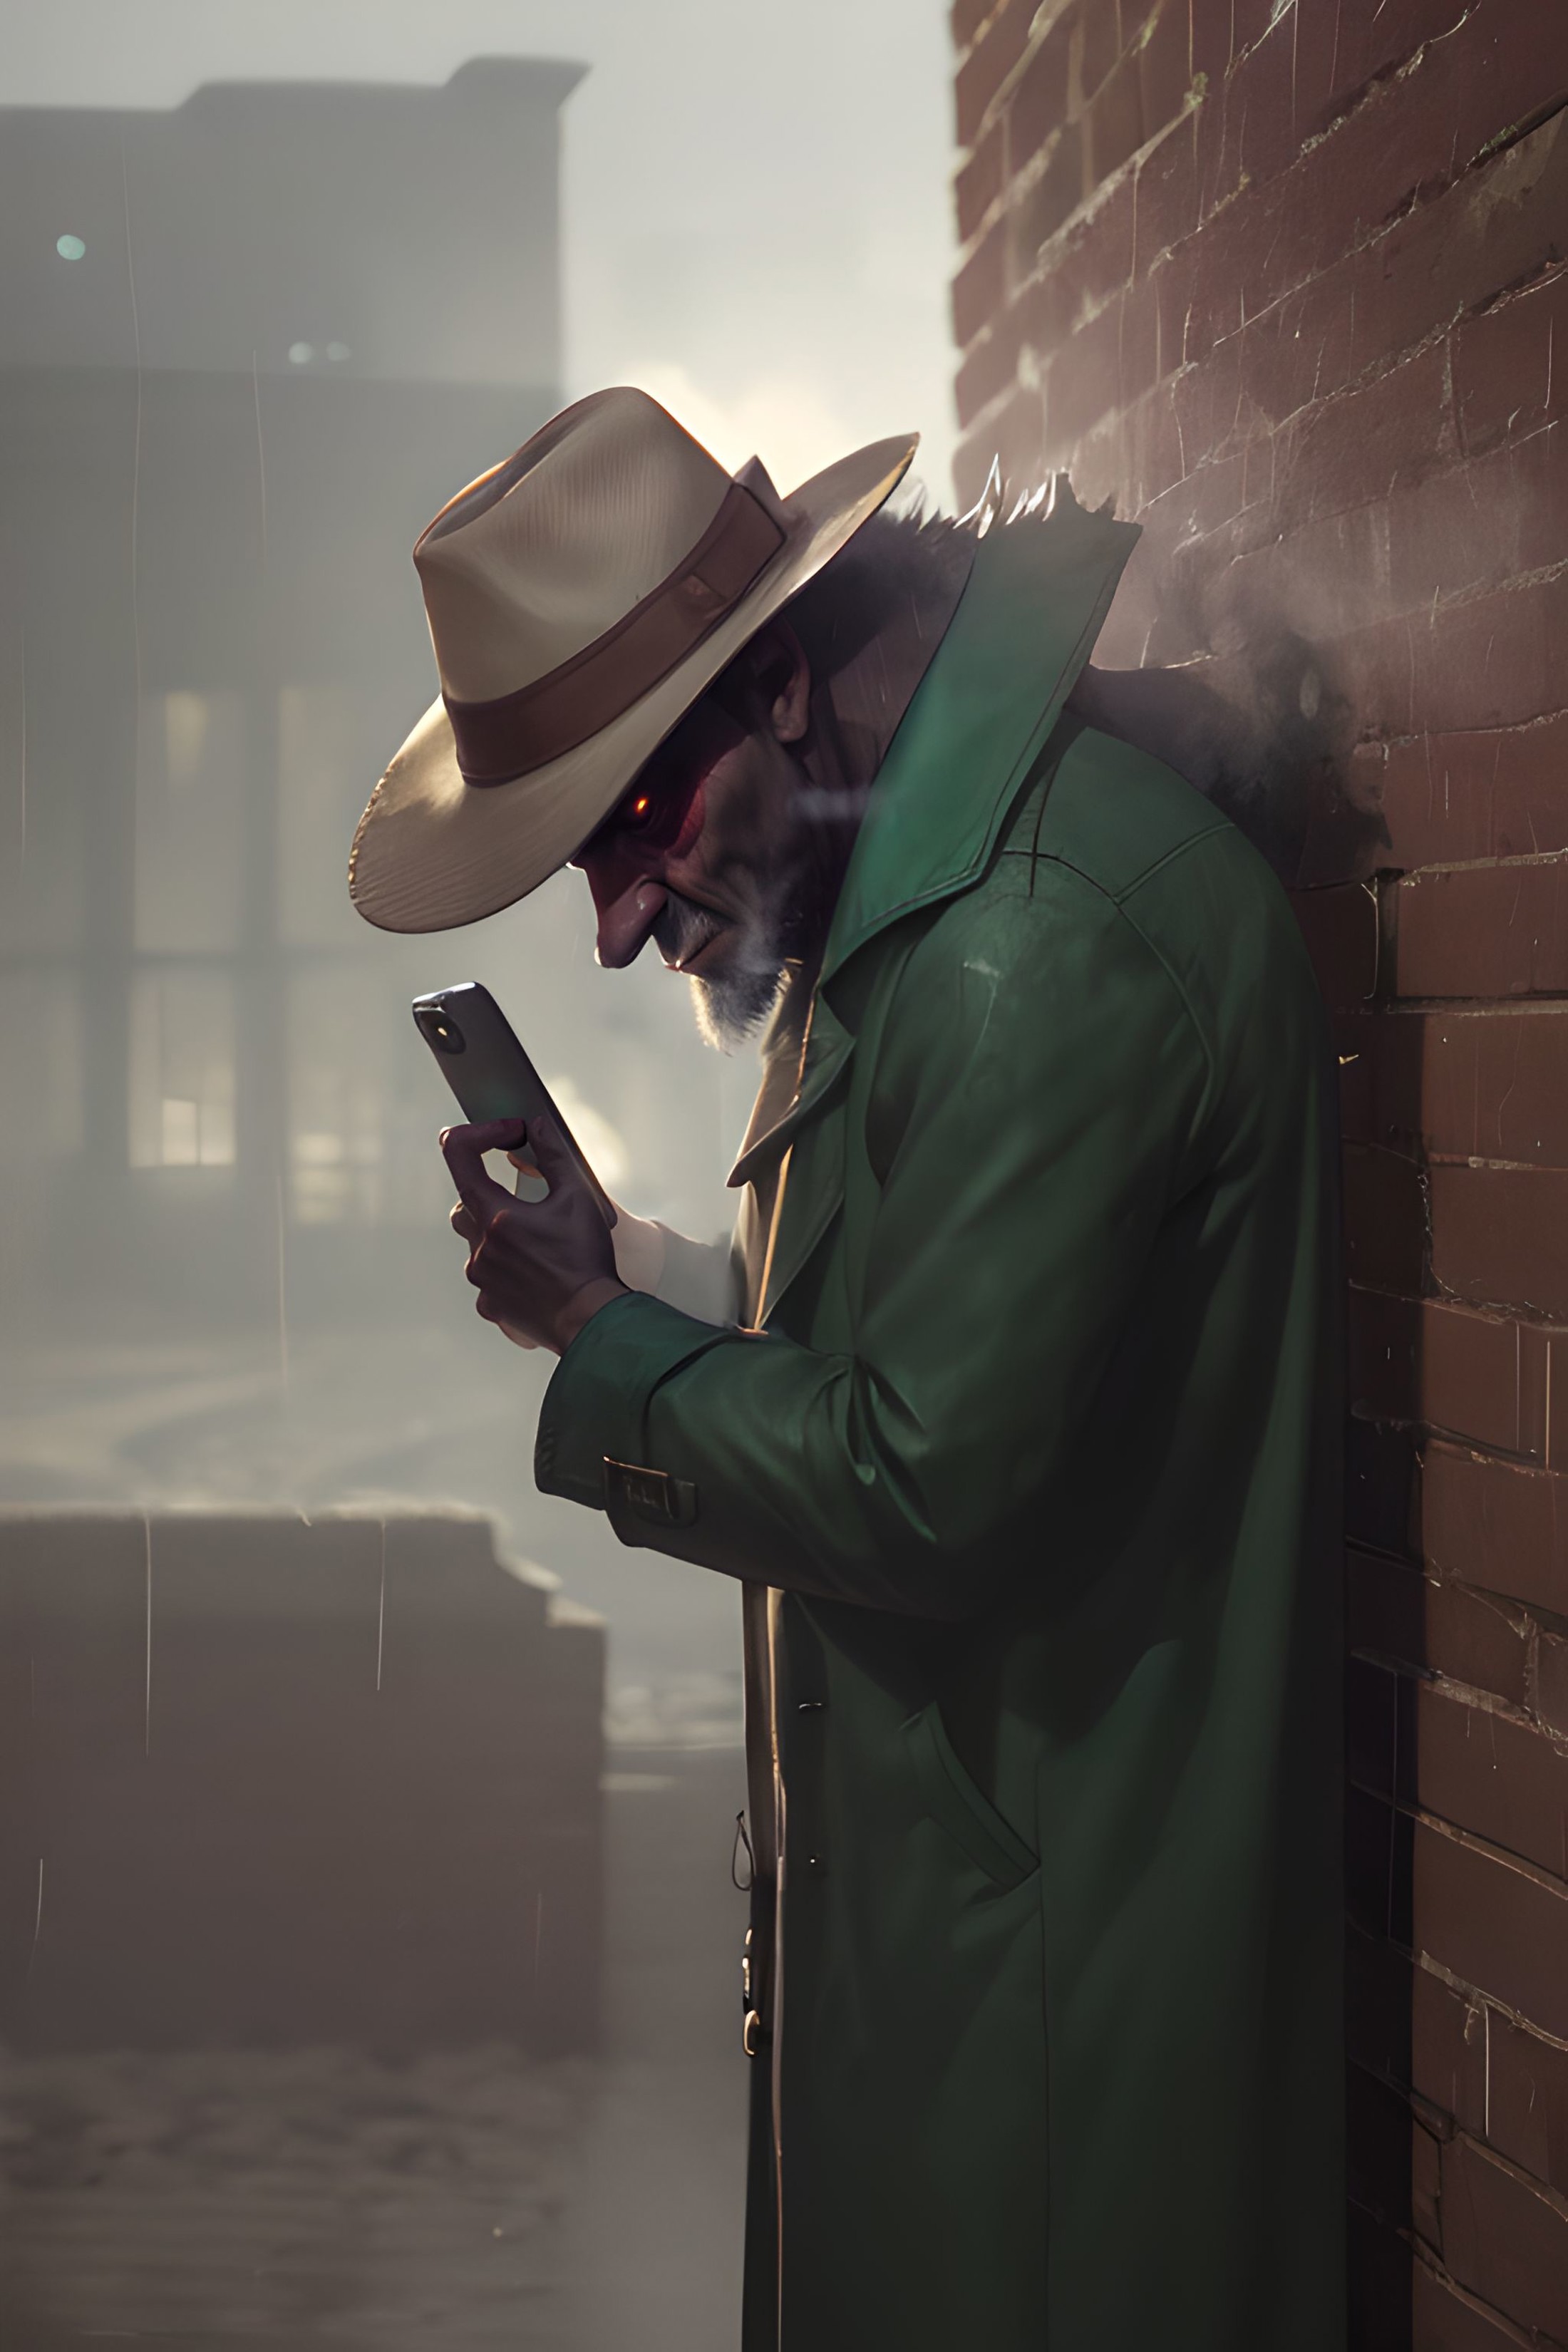 [monster:Noir detective:0.5], leaning on a brick wall, rain, grizzled, fedora, trenchcoat, side view, smoking a cigar, hol...